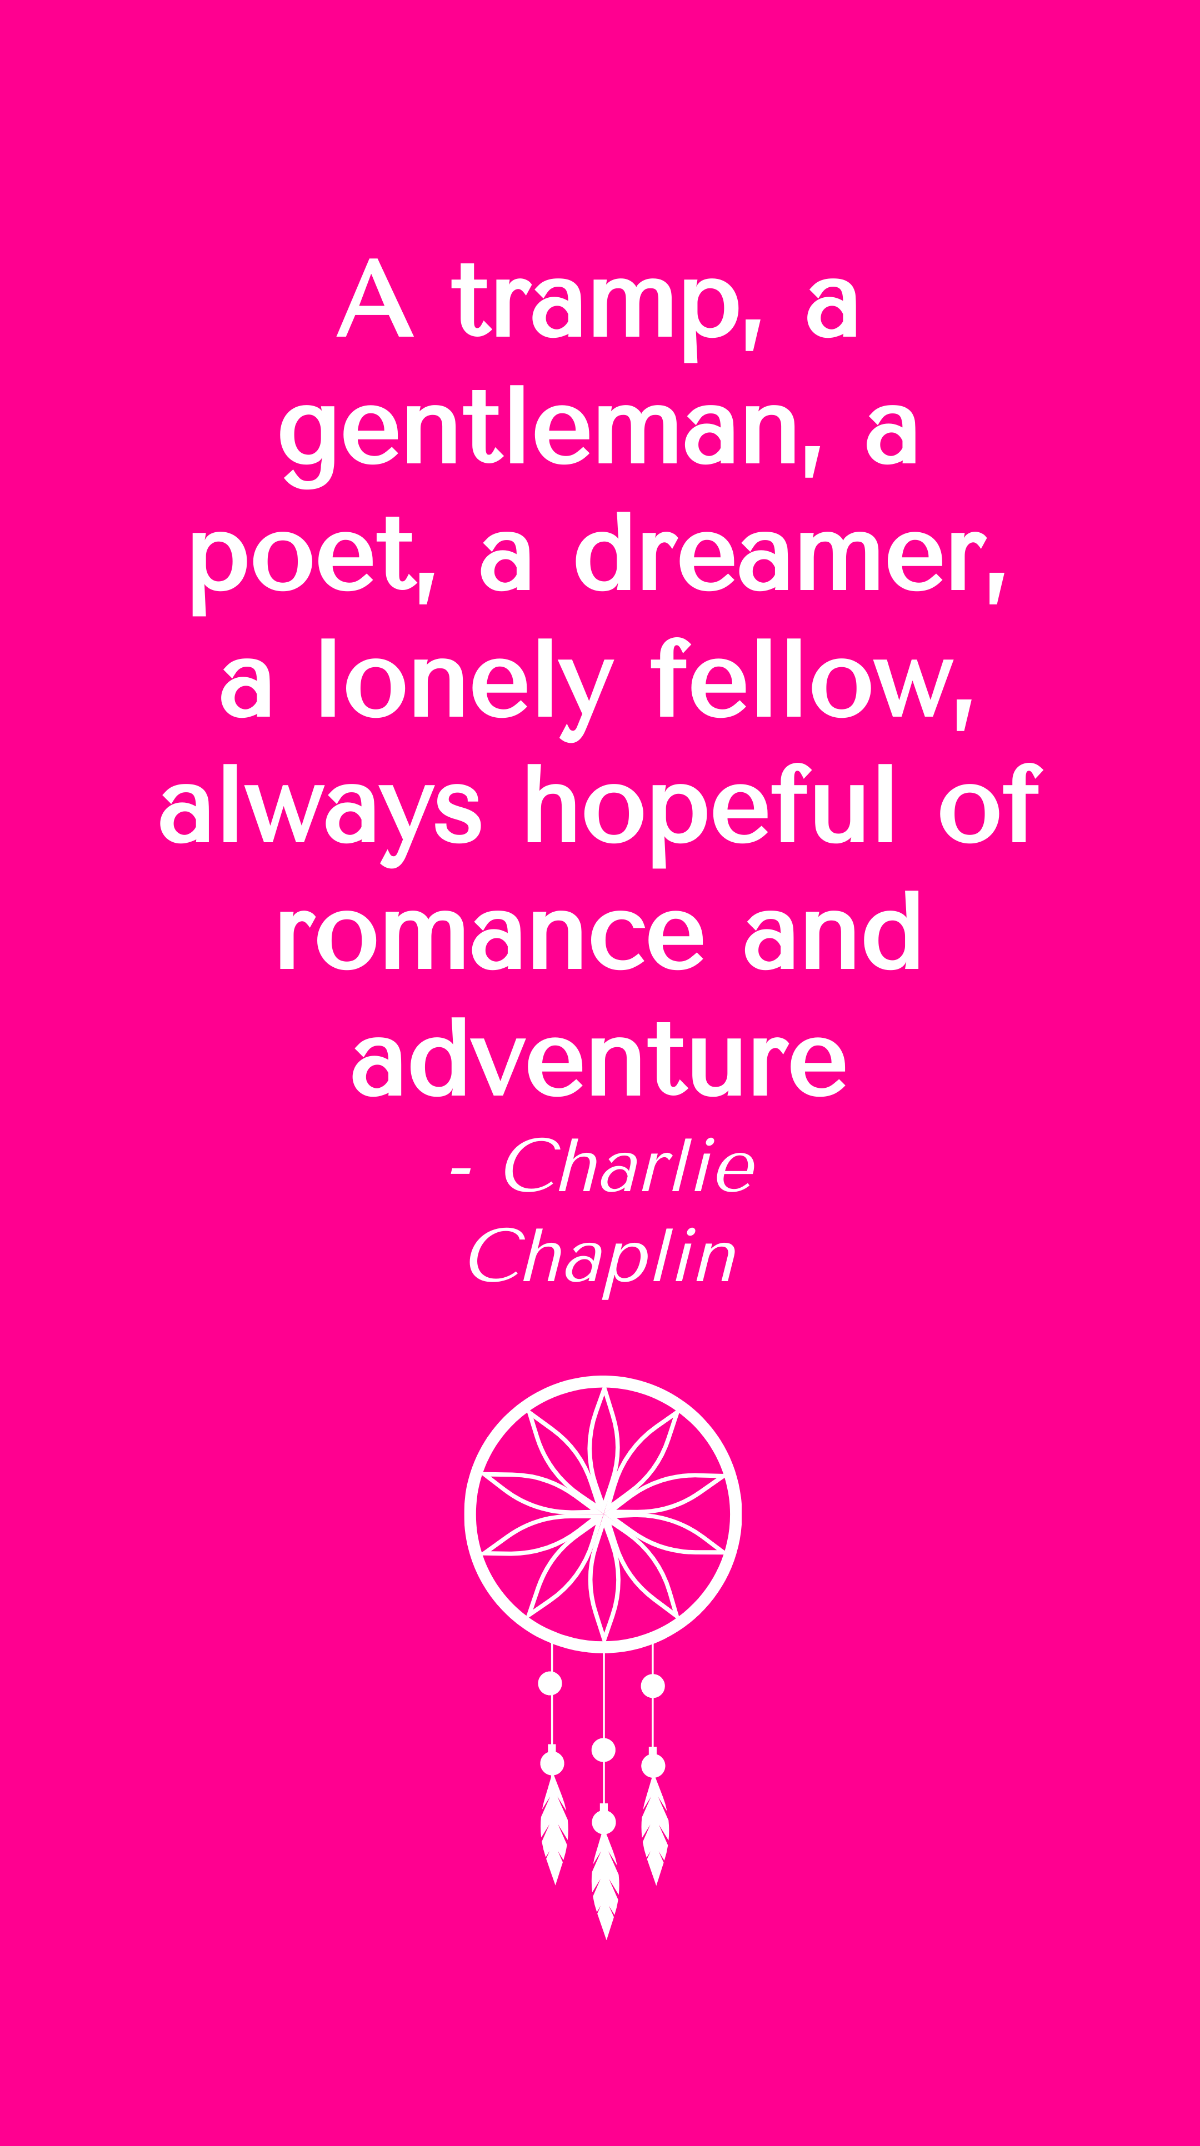 Free Charlie Chaplin - A tramp, a gentleman, a poet, a dreamer, a lonely fellow, always hopeful of romance and adventure Template